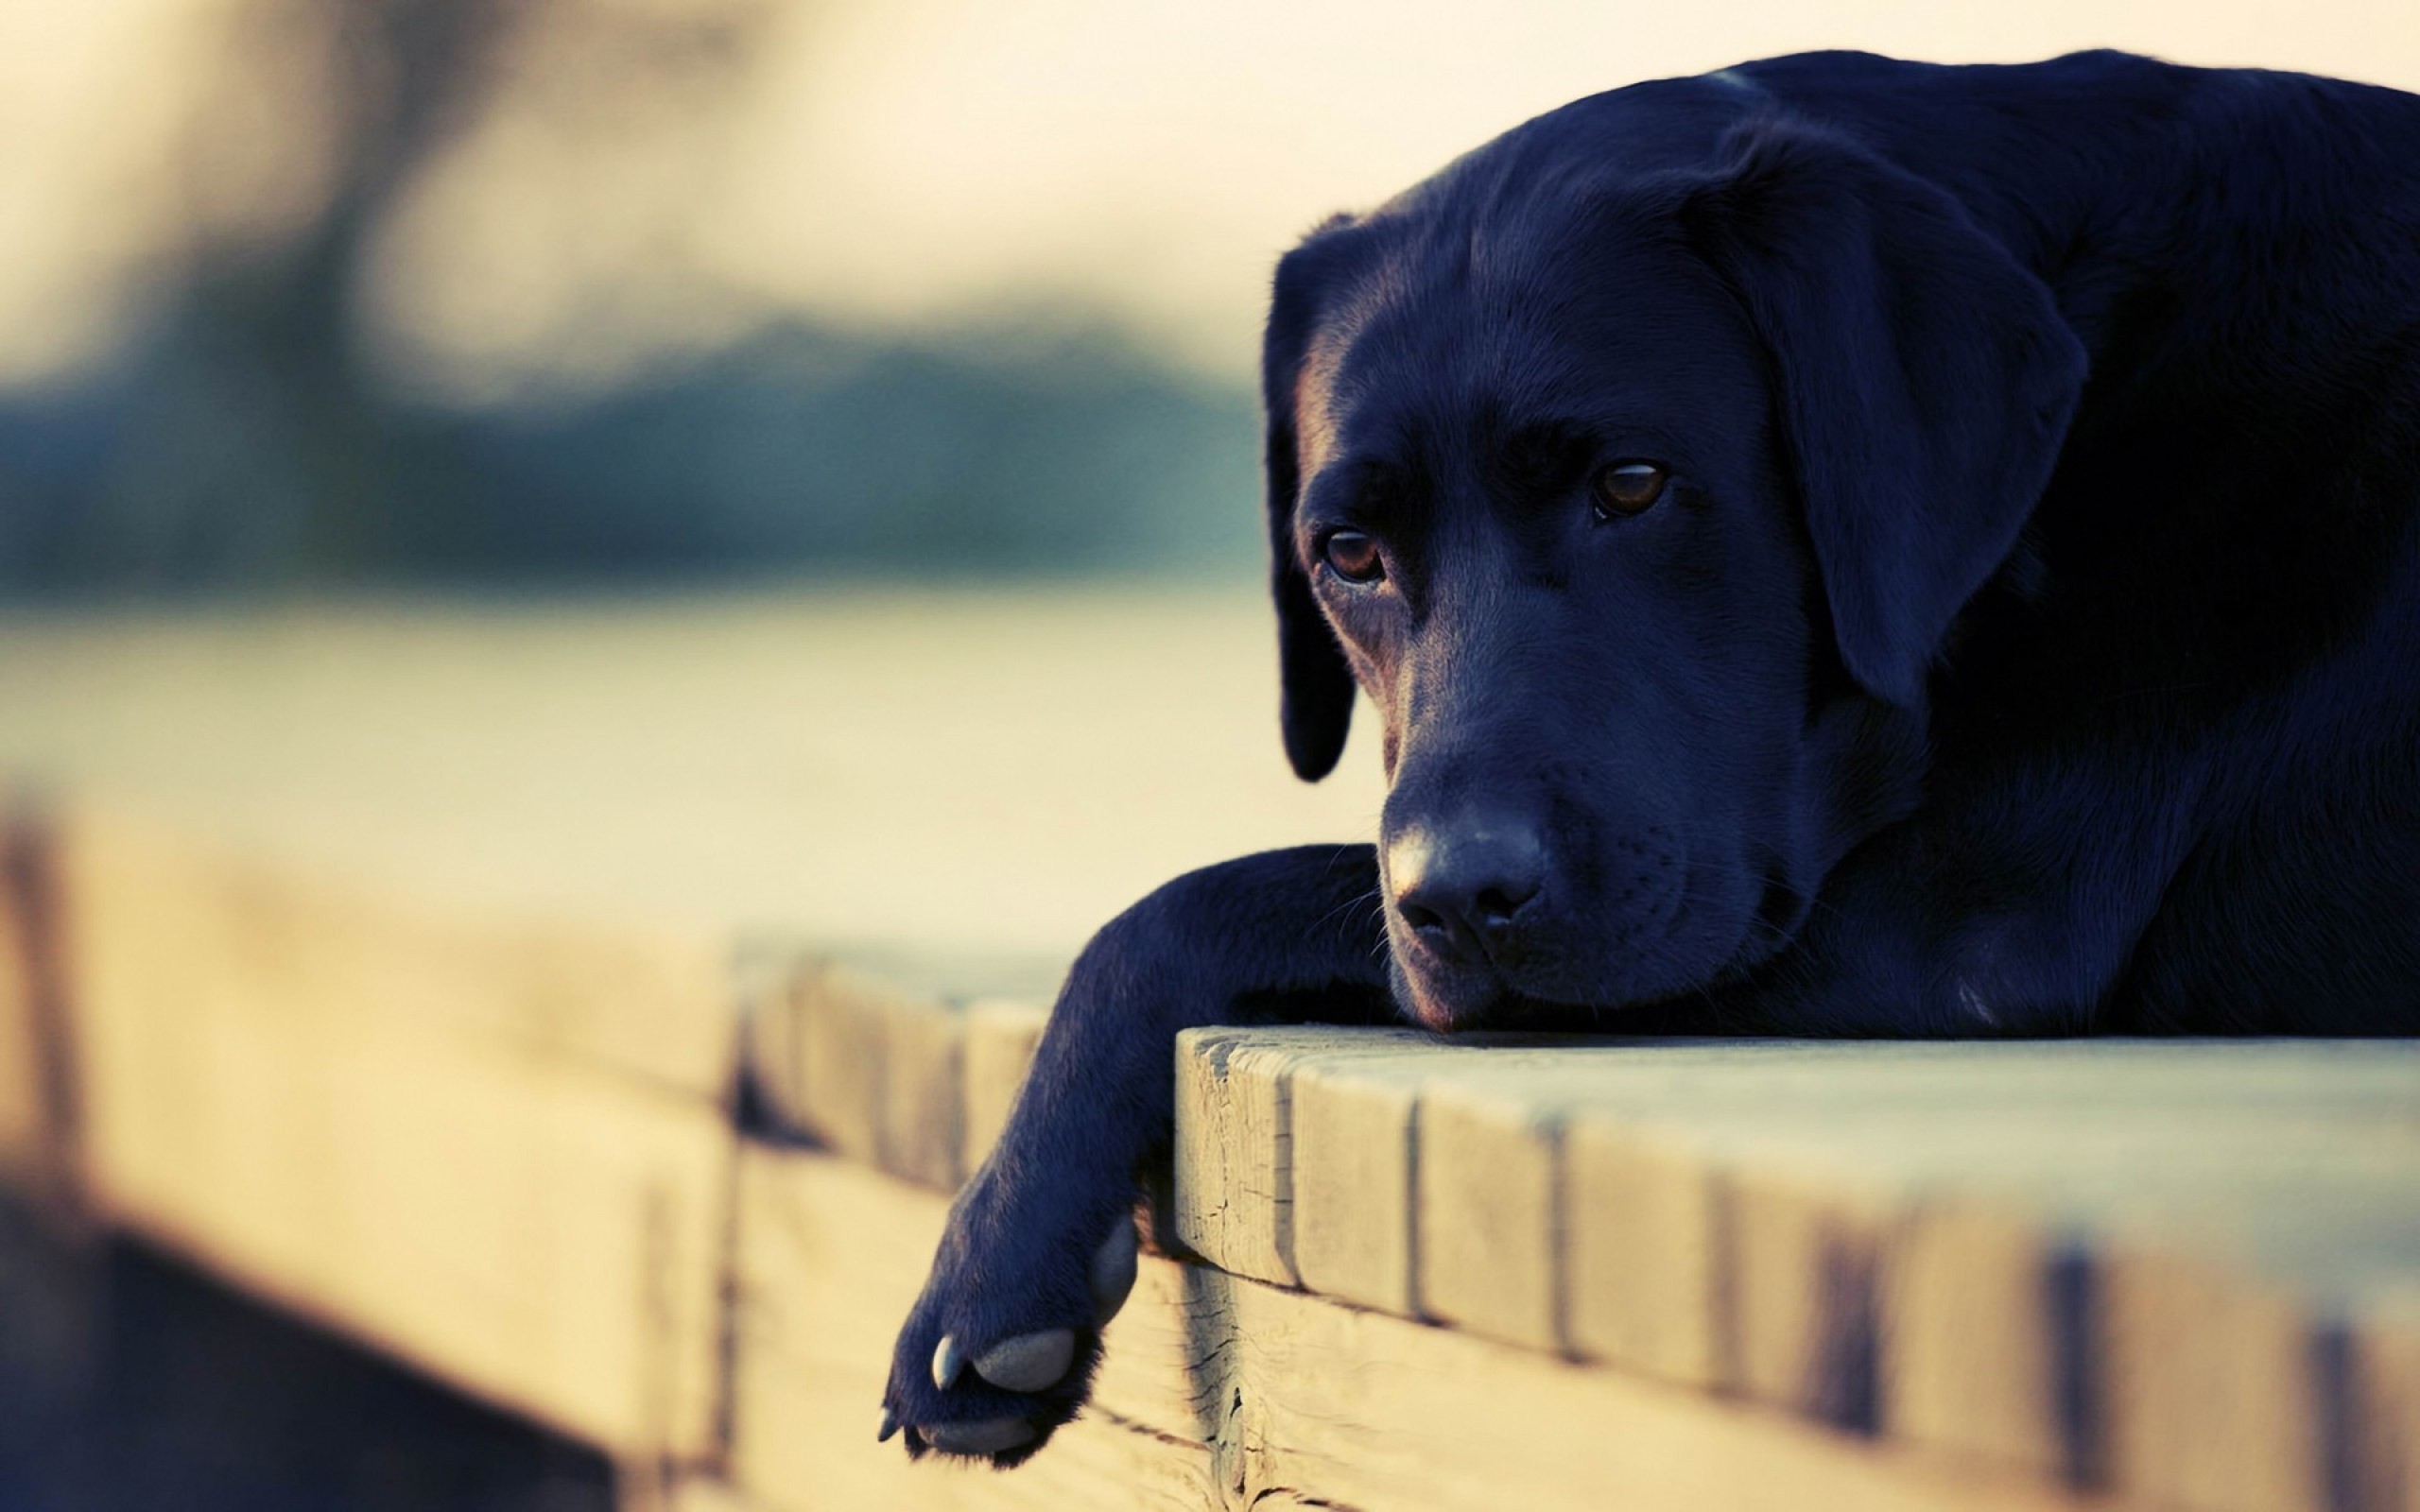 2560x1600 Black Dog HD Wallpapers - Free download latest Black Dog HD Wallpapers for  Computer, Mobile